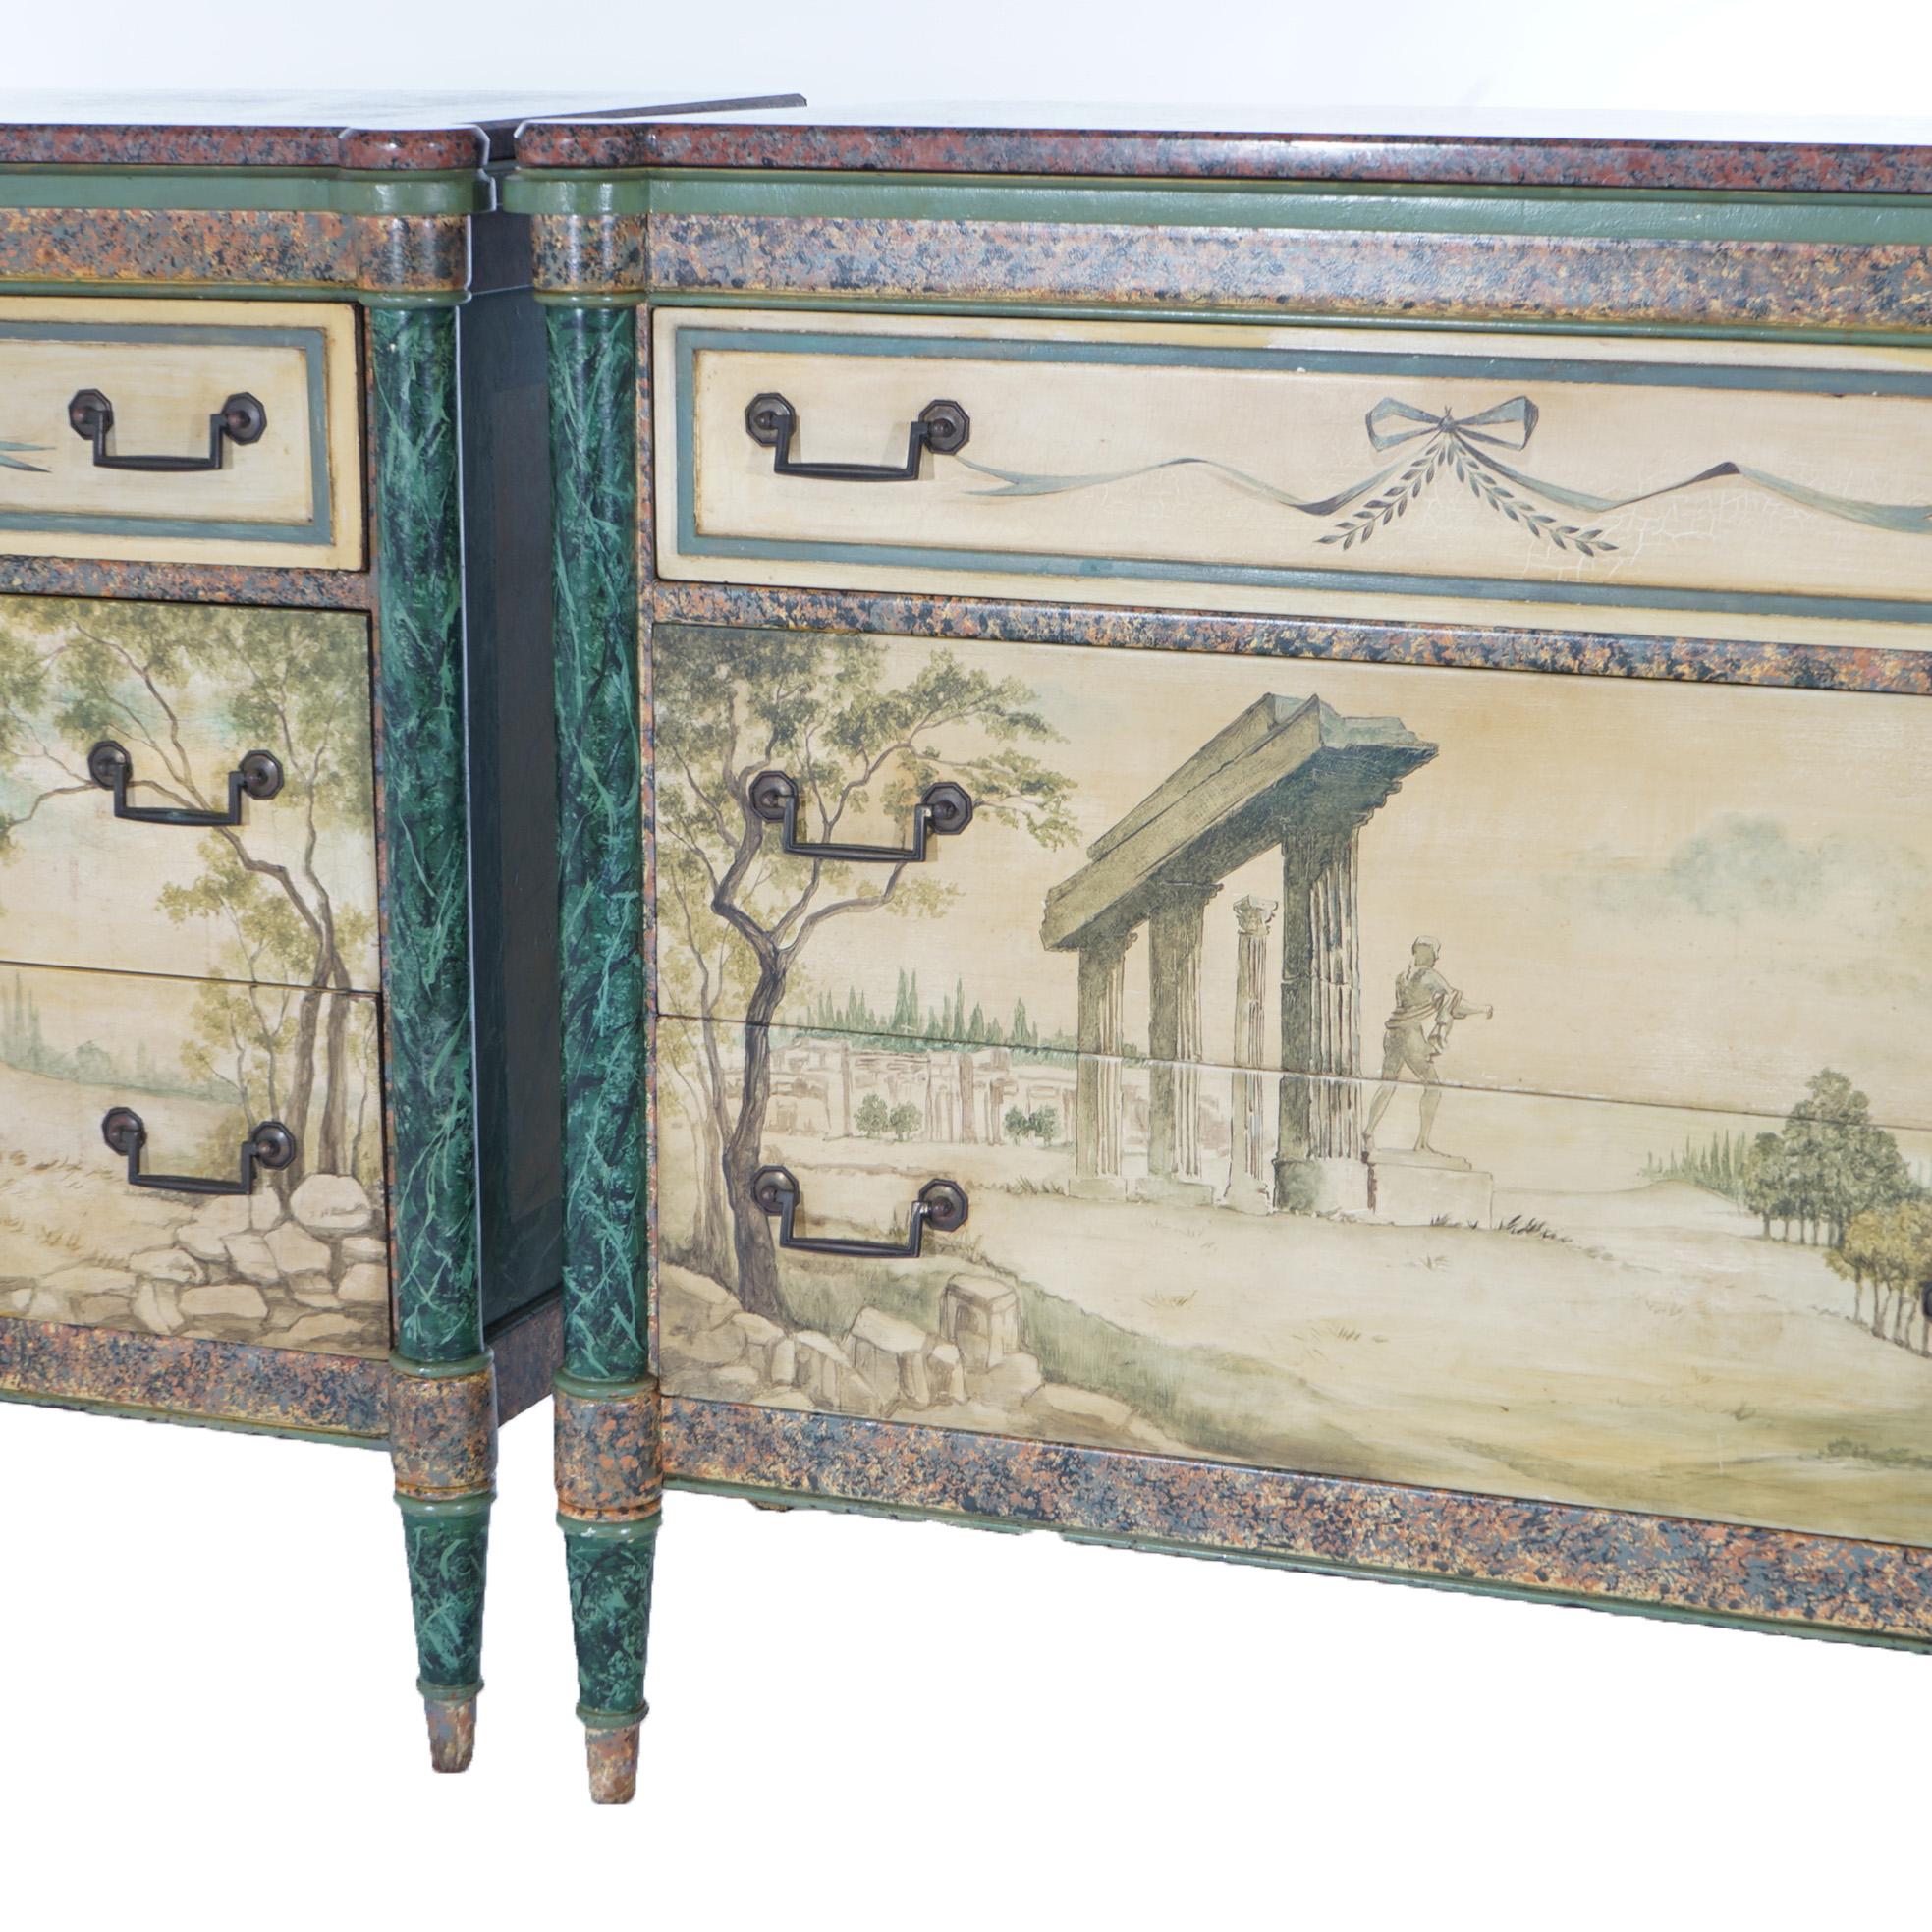 ***Ask About Reduced In-House Delivery Rates - Reliable Professional Service & Fully Insured***
Pair of Antique Neoclassical Italian School Faux Painted & Rouge Marble Chests with Landscape & Architectural Ruins, c1920

Measures- 33.75''H x 36.75''W